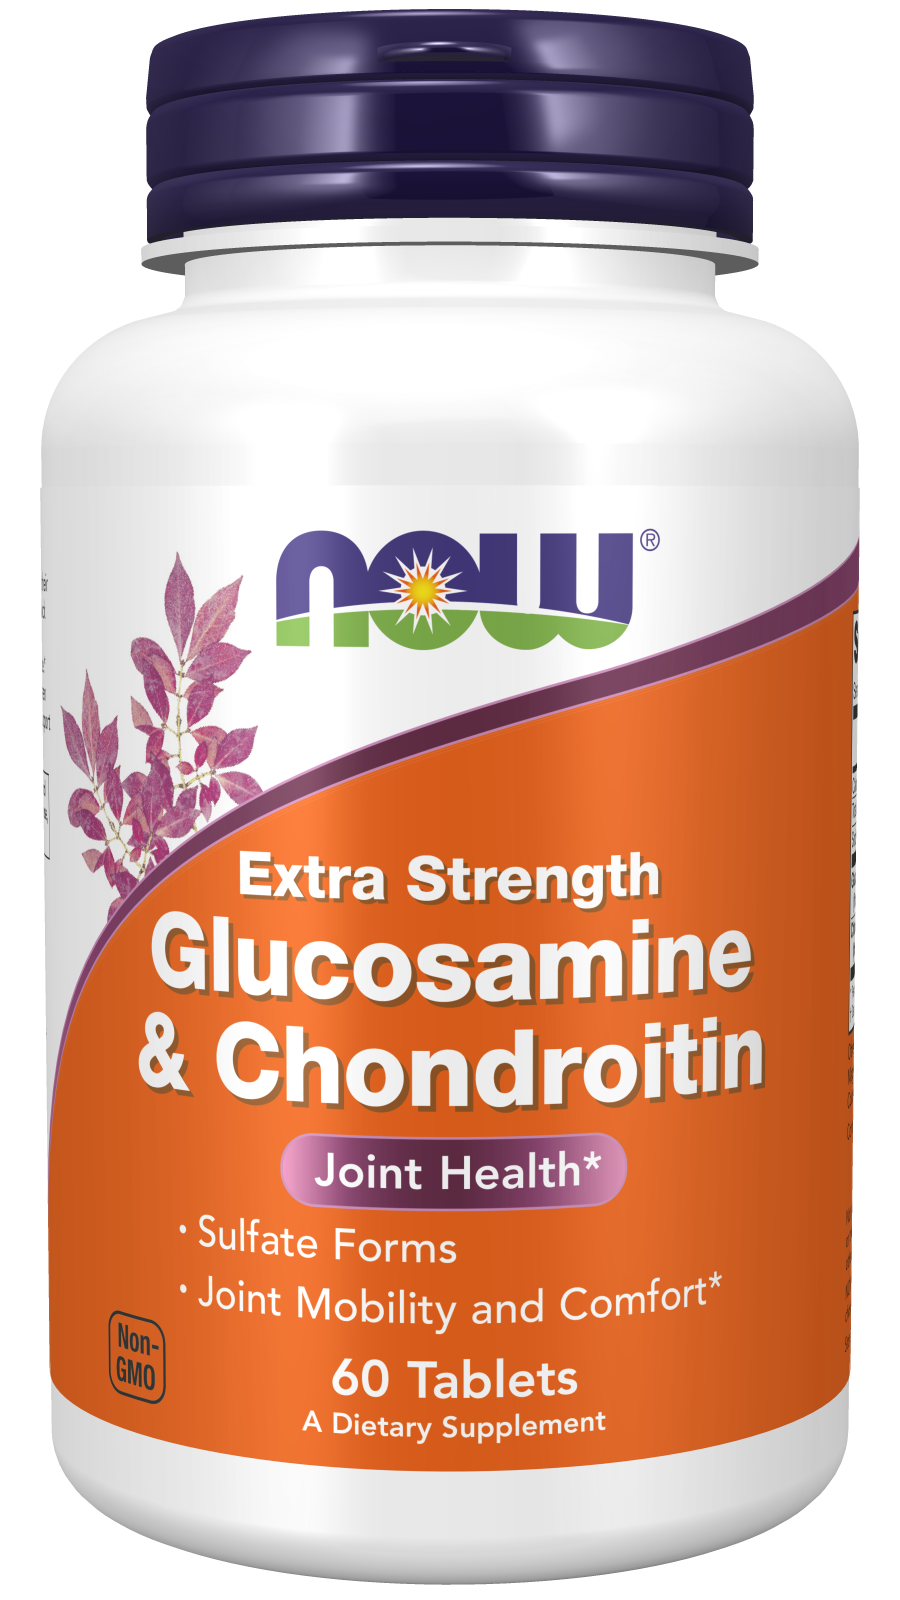 Glucosamine & Chondroitin Extra Strength - 60 Tablets Bottle Front